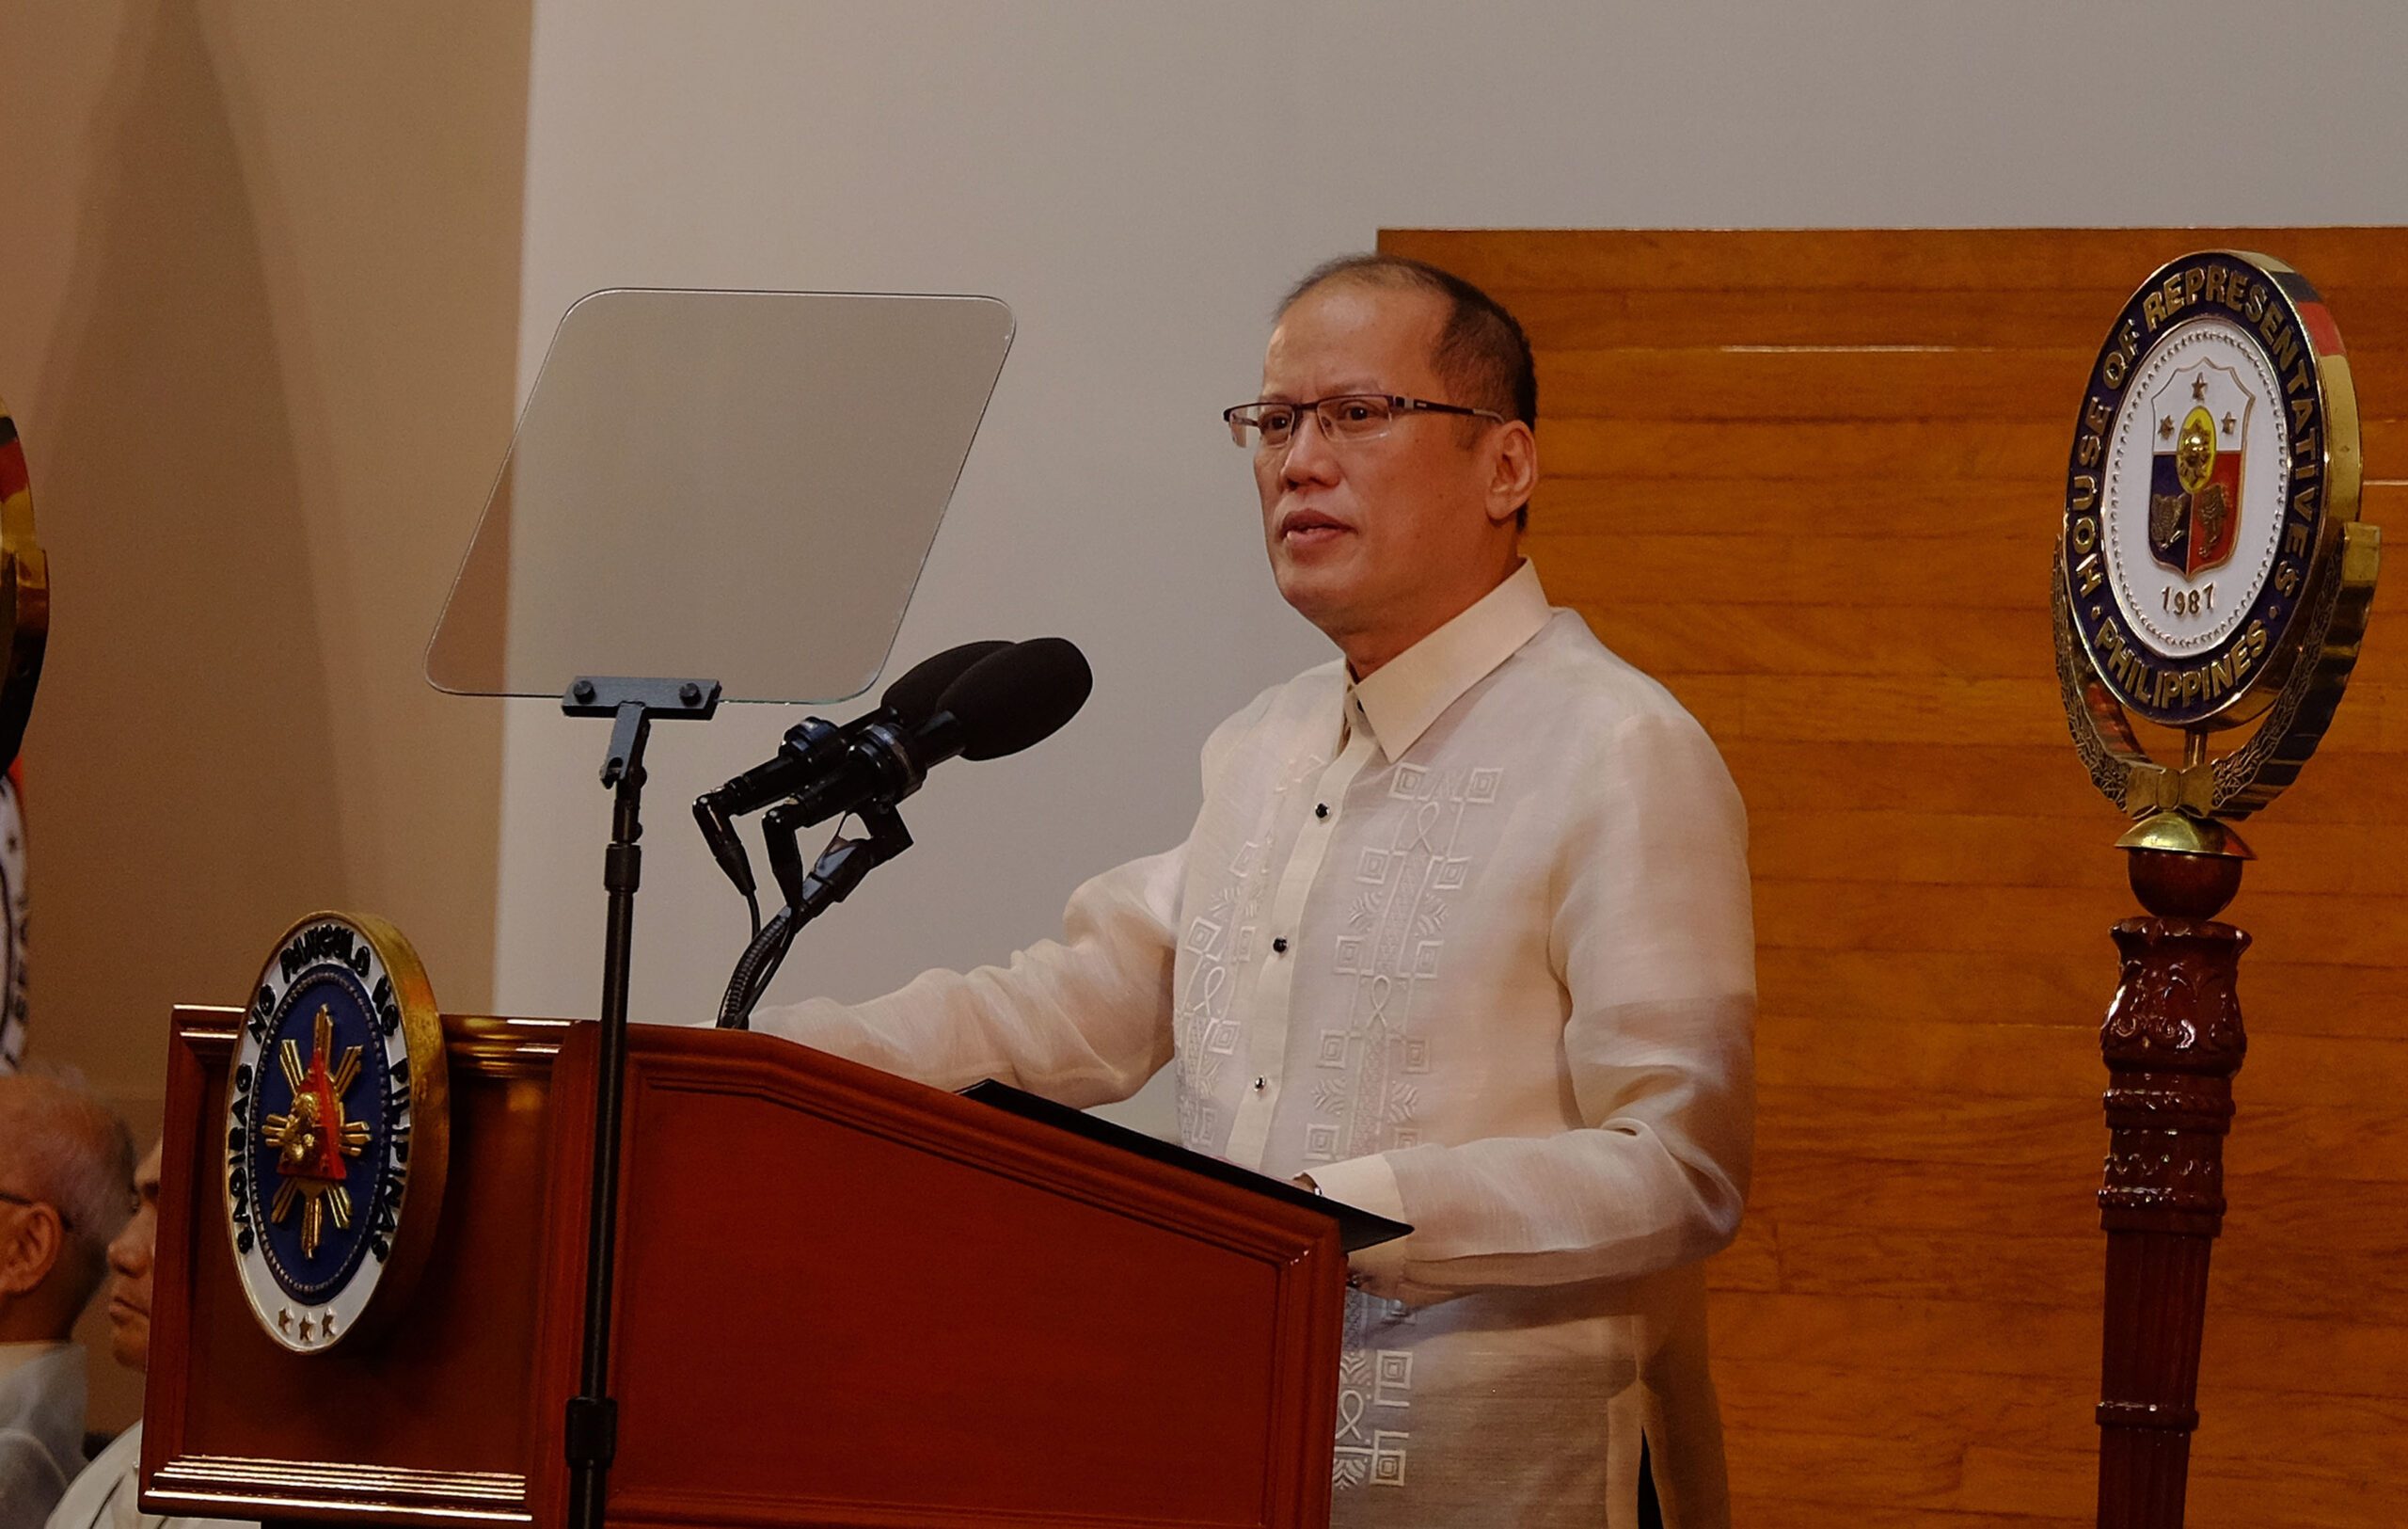 Aquino’s ‘silence’ on human rights adds ‘insult to injury’